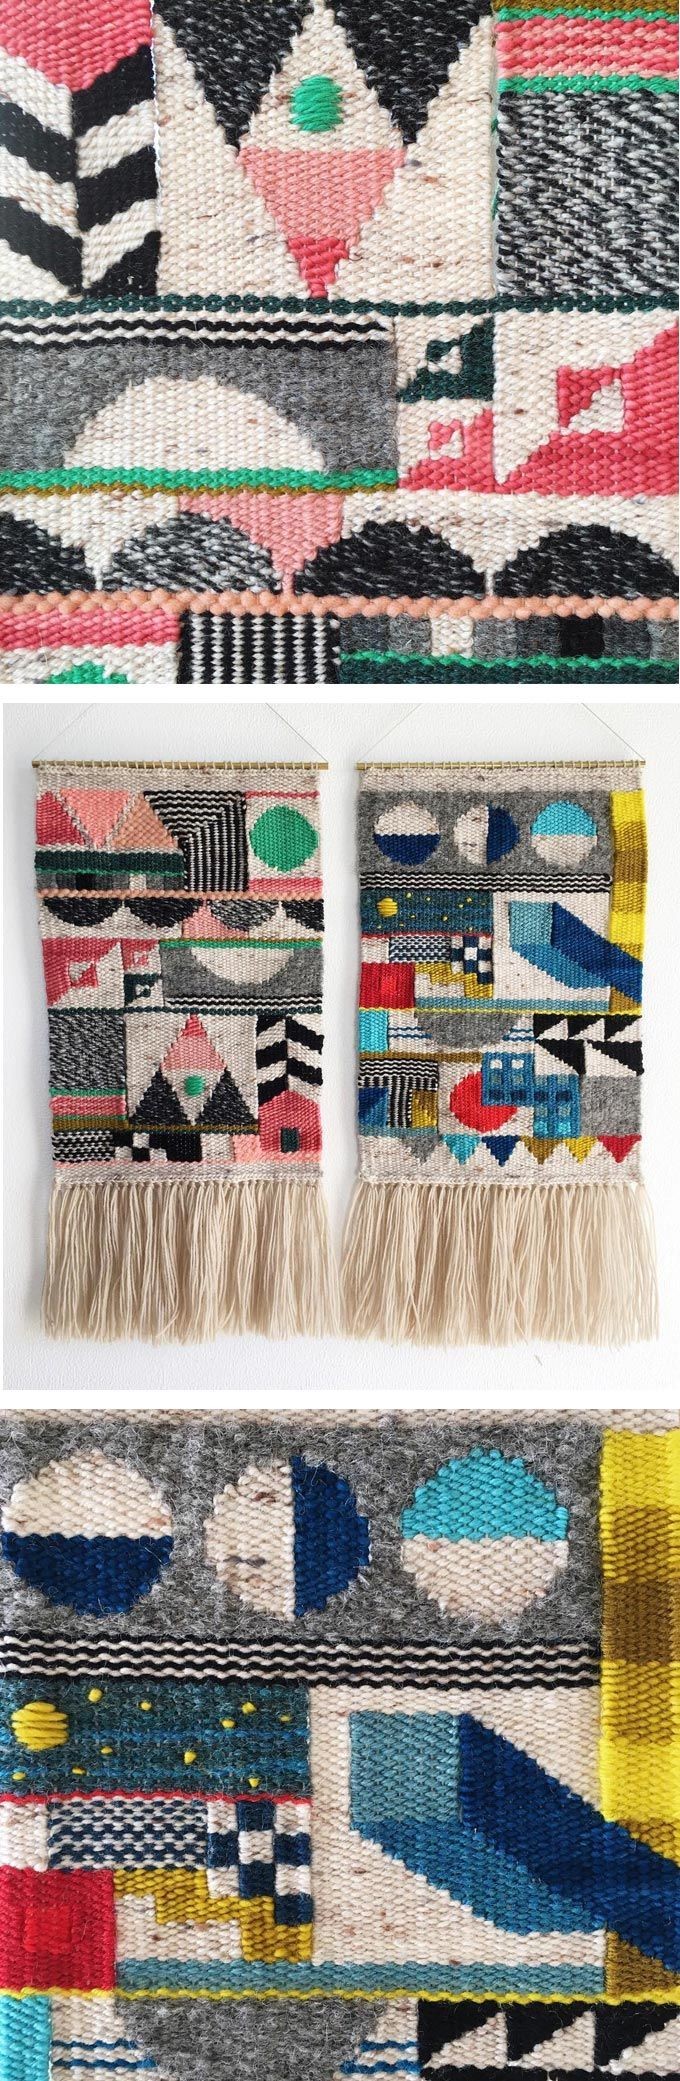 Genevieve Griffiths weaves abstract wall hangings inspired by architectural structures